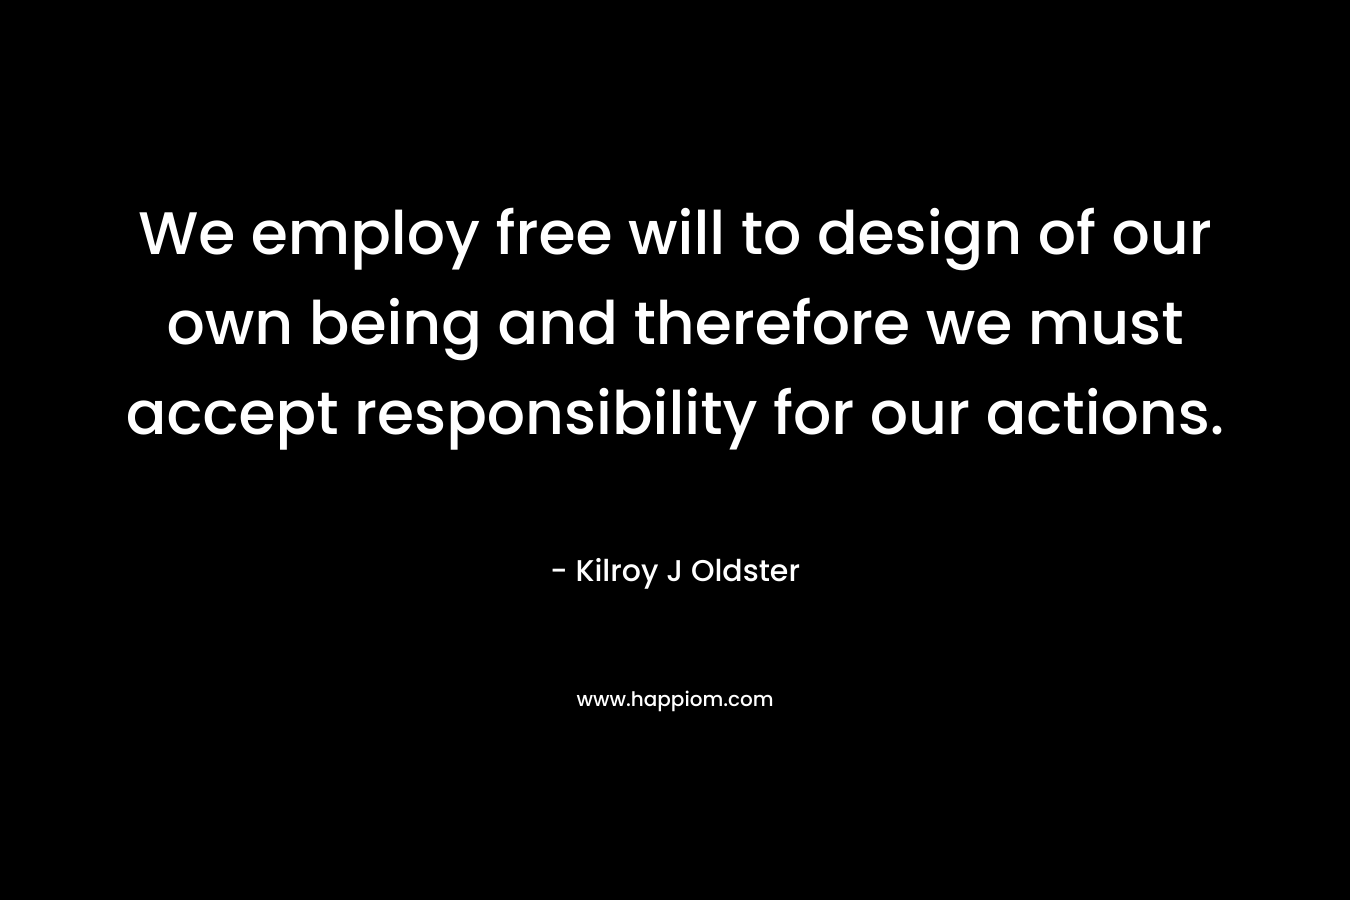 We employ free will to design of our own being and therefore we must accept responsibility for our actions. – Kilroy J Oldster